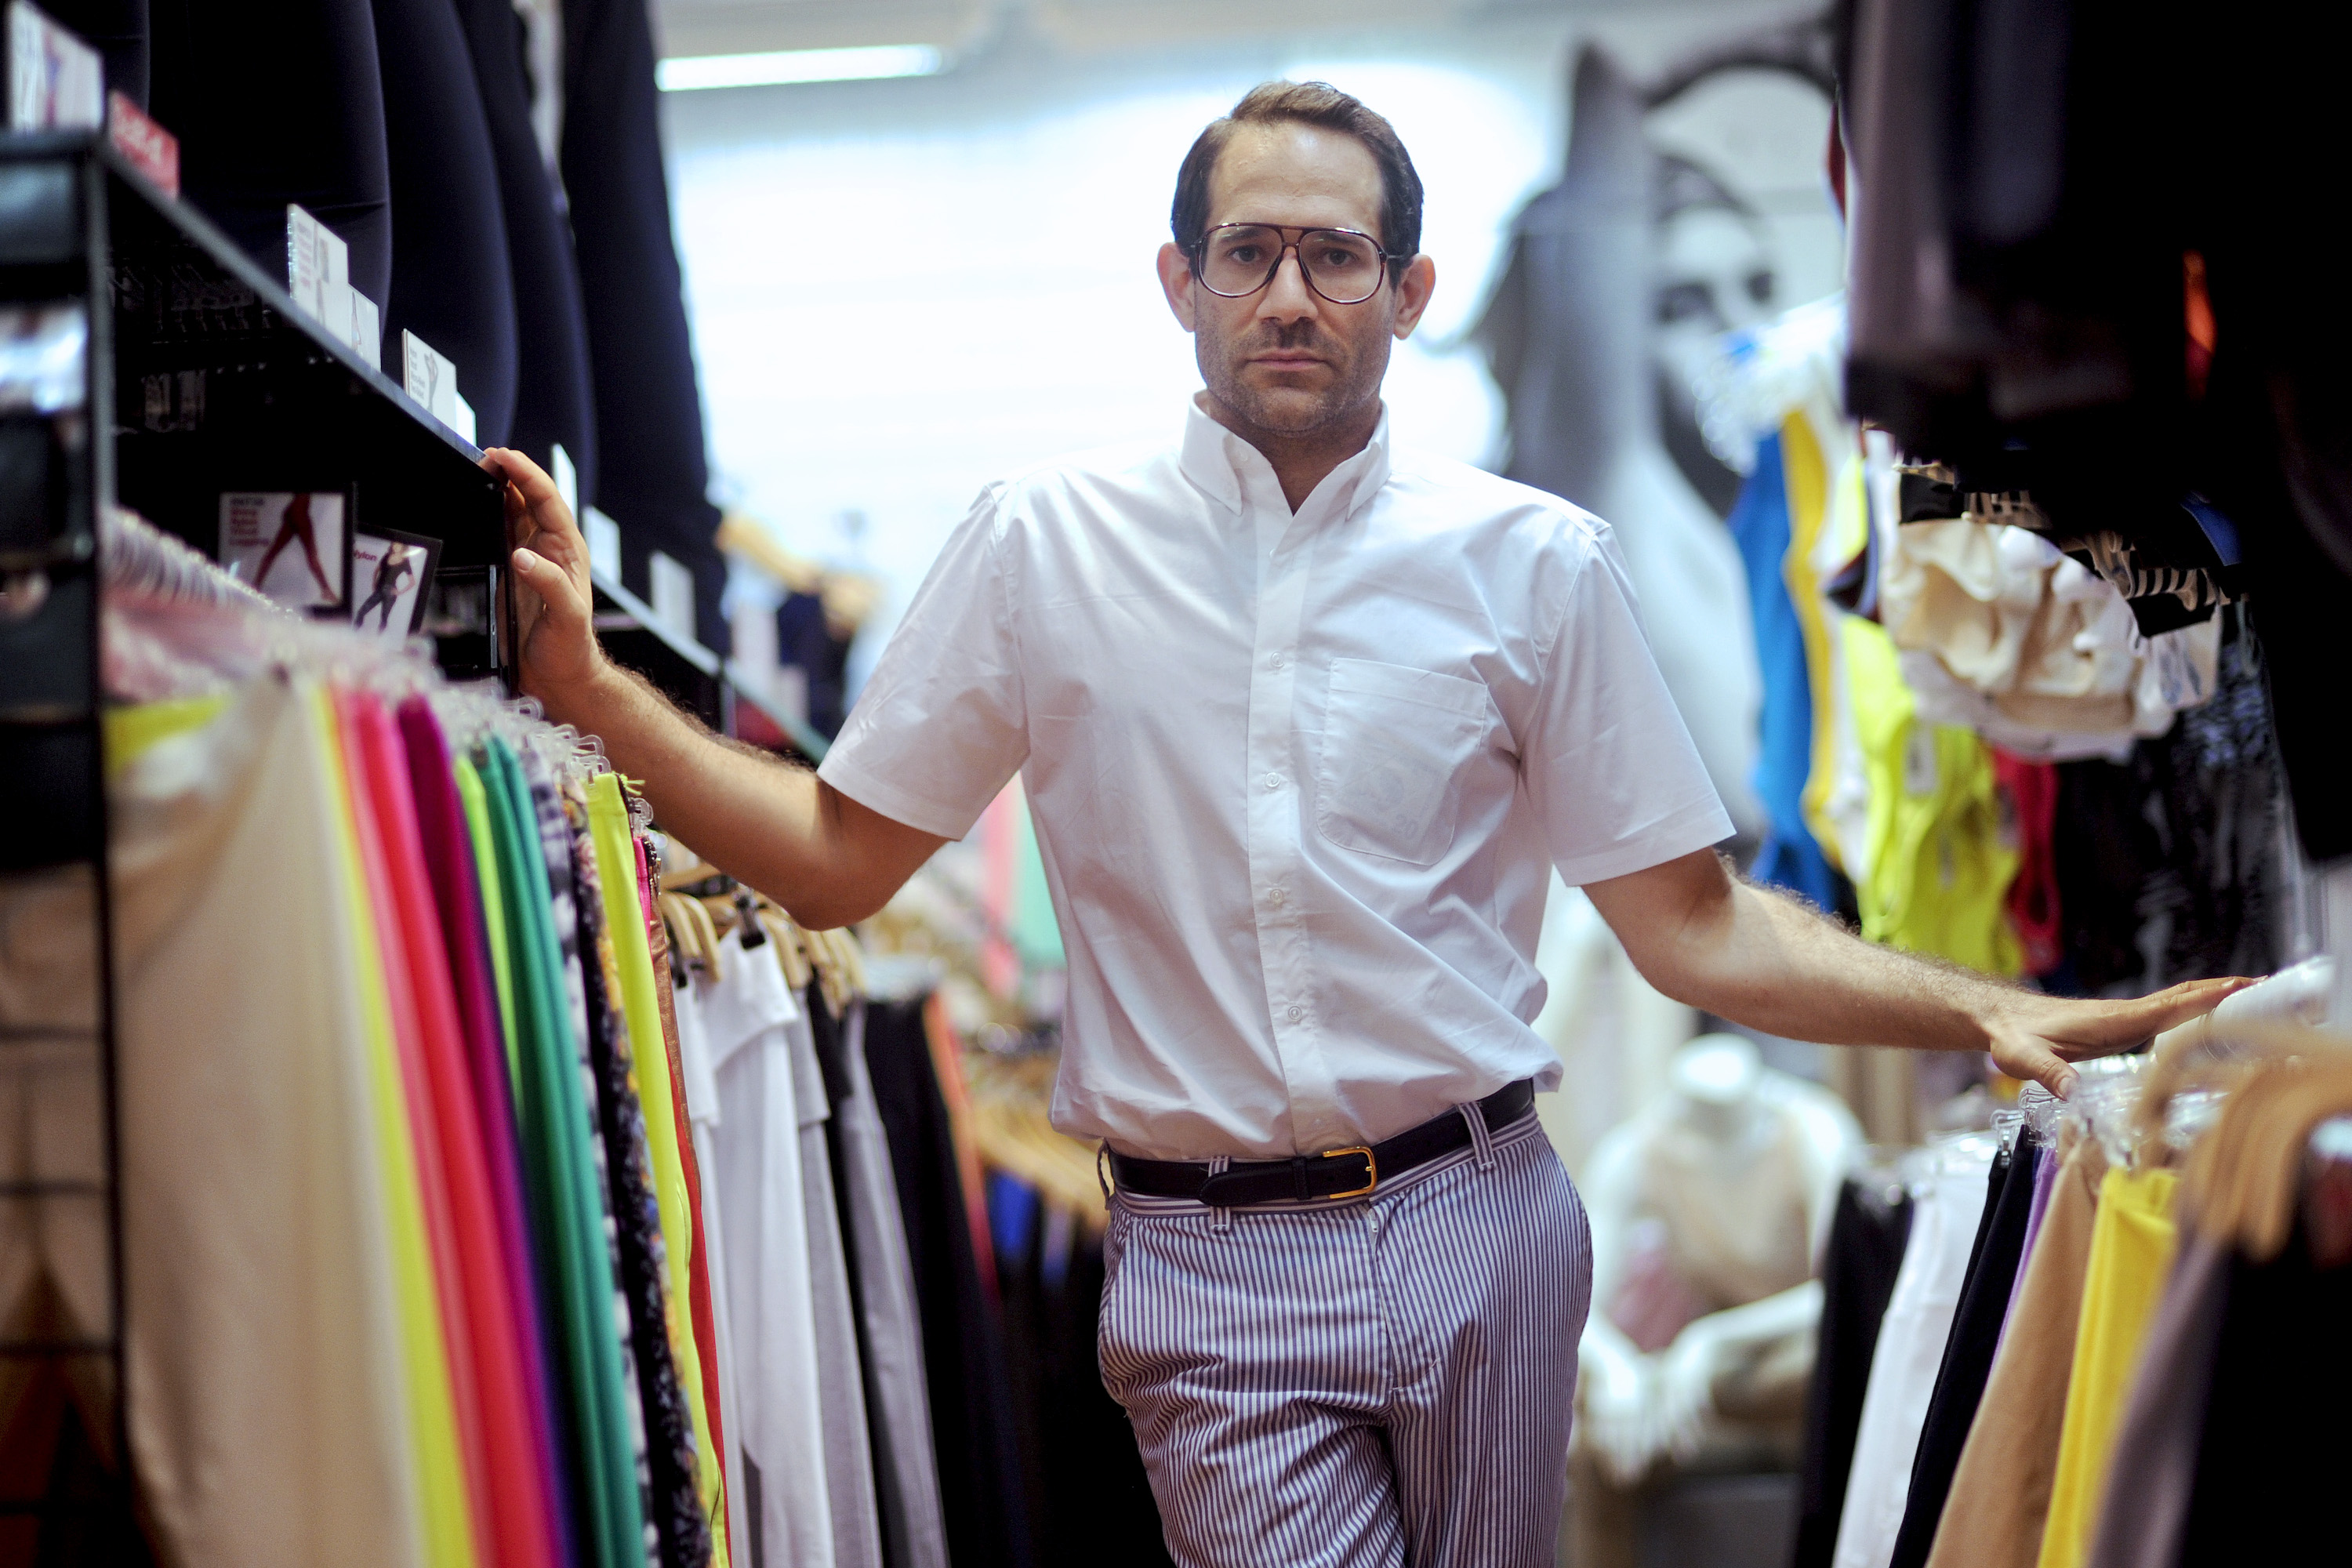 Dov Charney, former CEO of American Apparel. (Keith Bedford—Bloomberg/Getty Images)